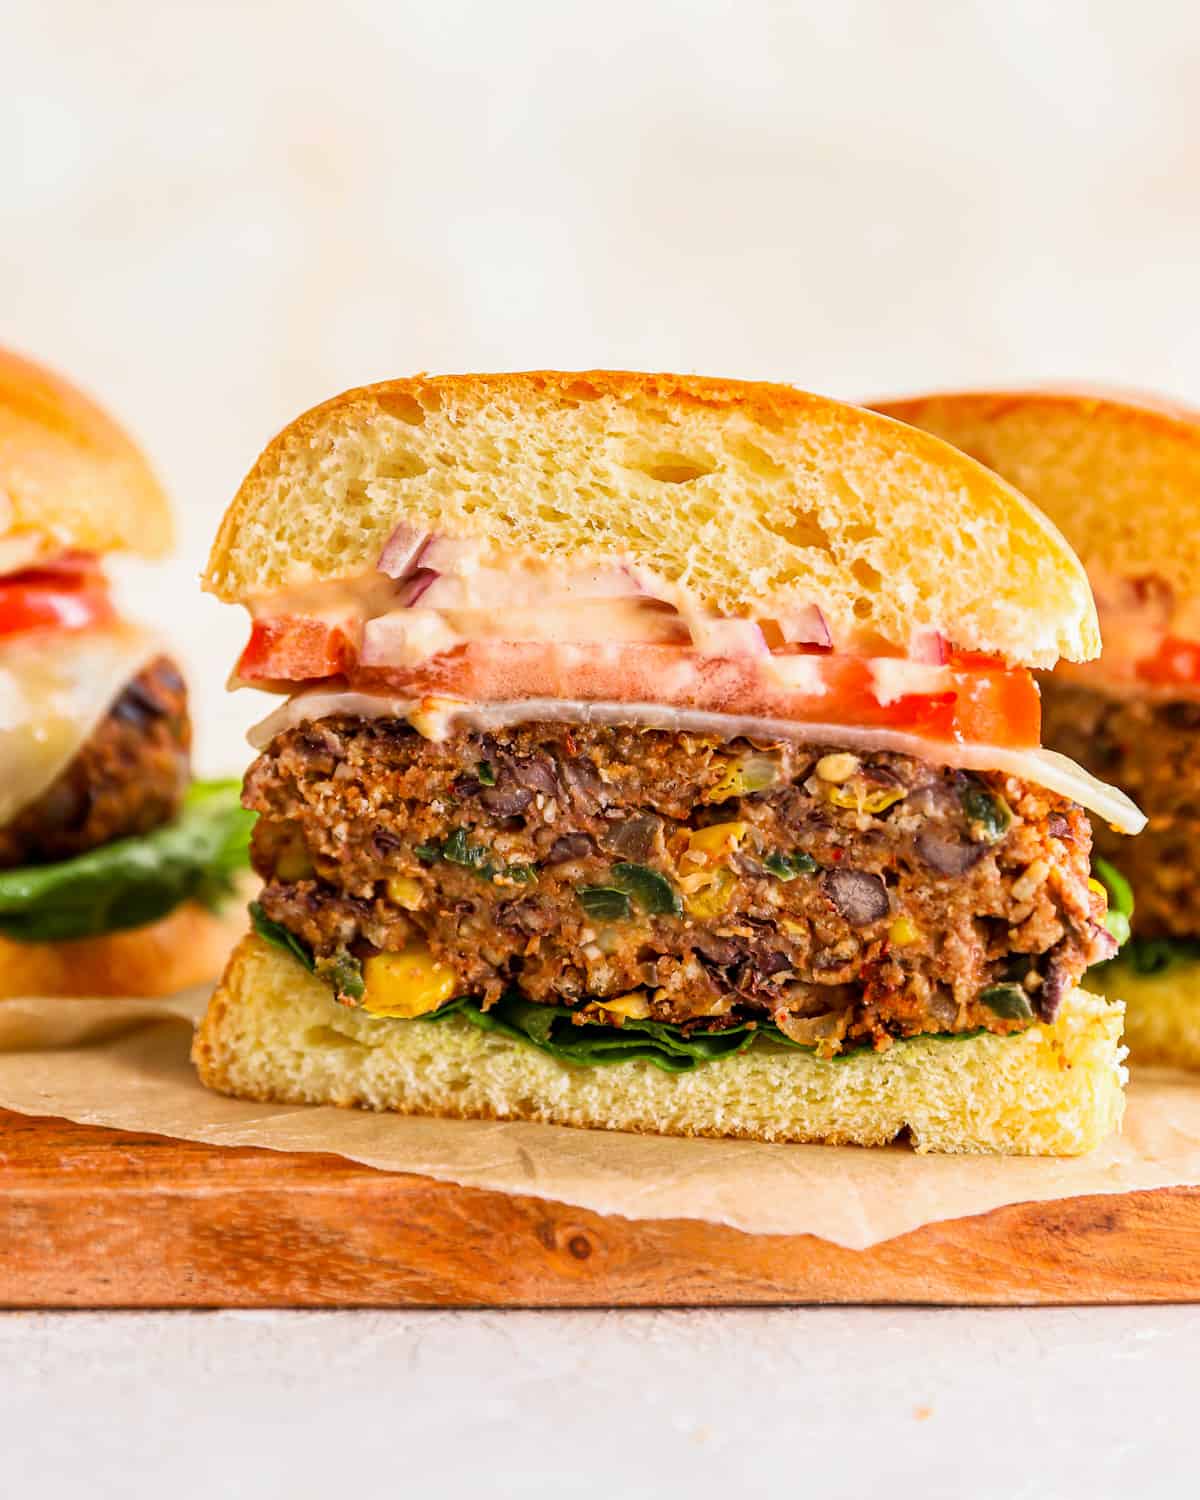 veggie burger cut in half to show the patties, filled with black beans, corn, and more.